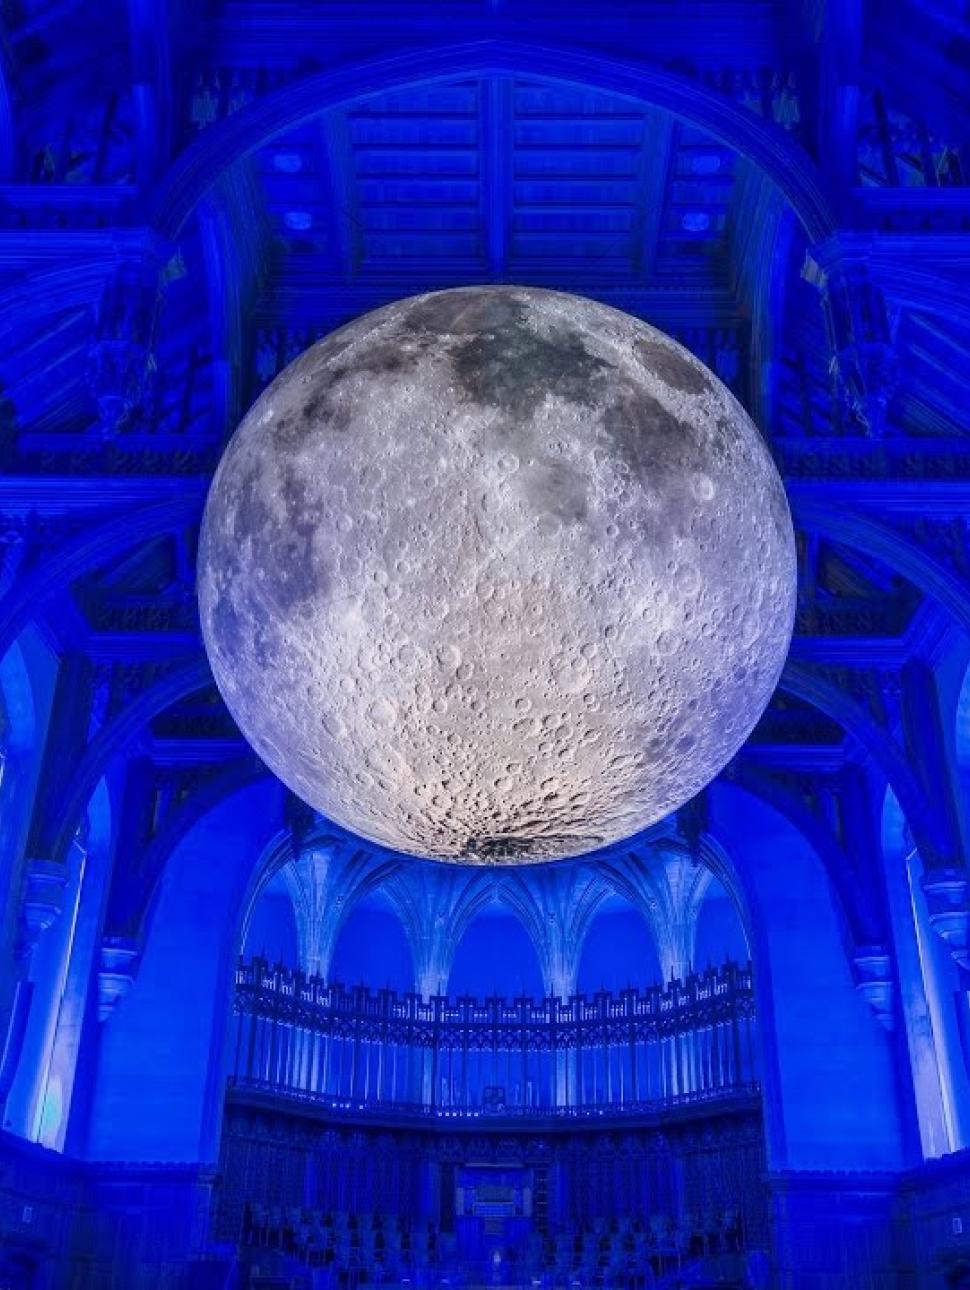 A large moon hangs in the middle of the Great Hall at the University of Bristol UK, where it is lit in a dazzling white against the atmospheric blue lighting that fills the historic building 